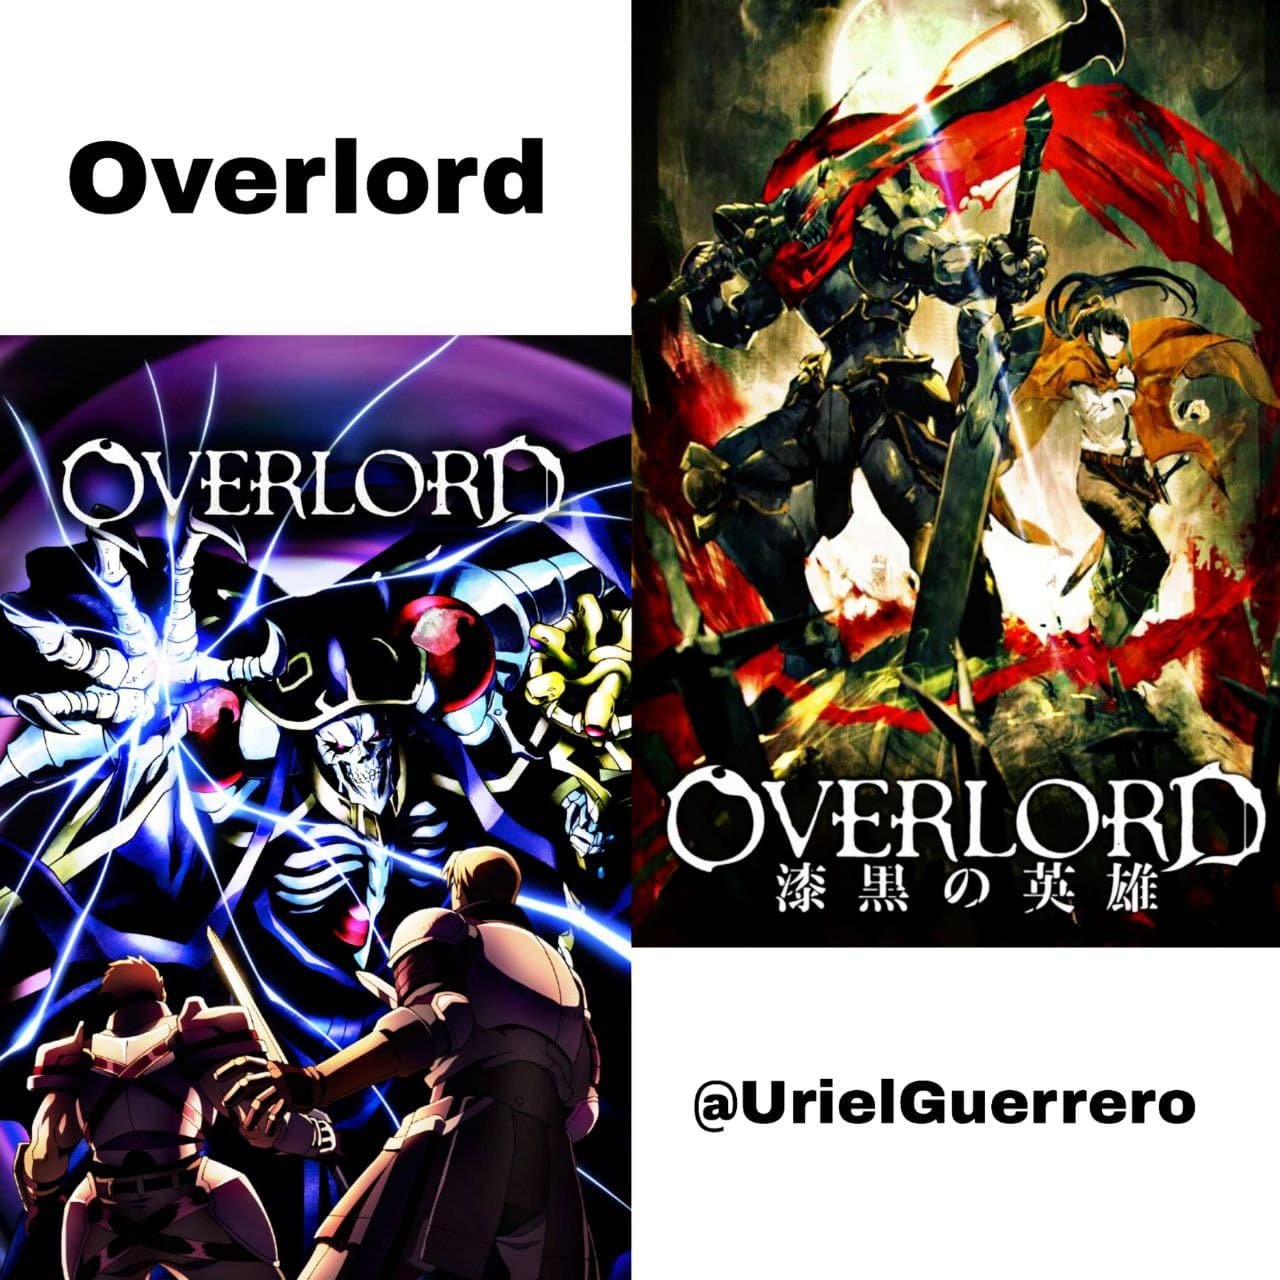 ENG-ESP] Overlord, reseña-Recomendación / Overlord, review-recommendation |  PeakD